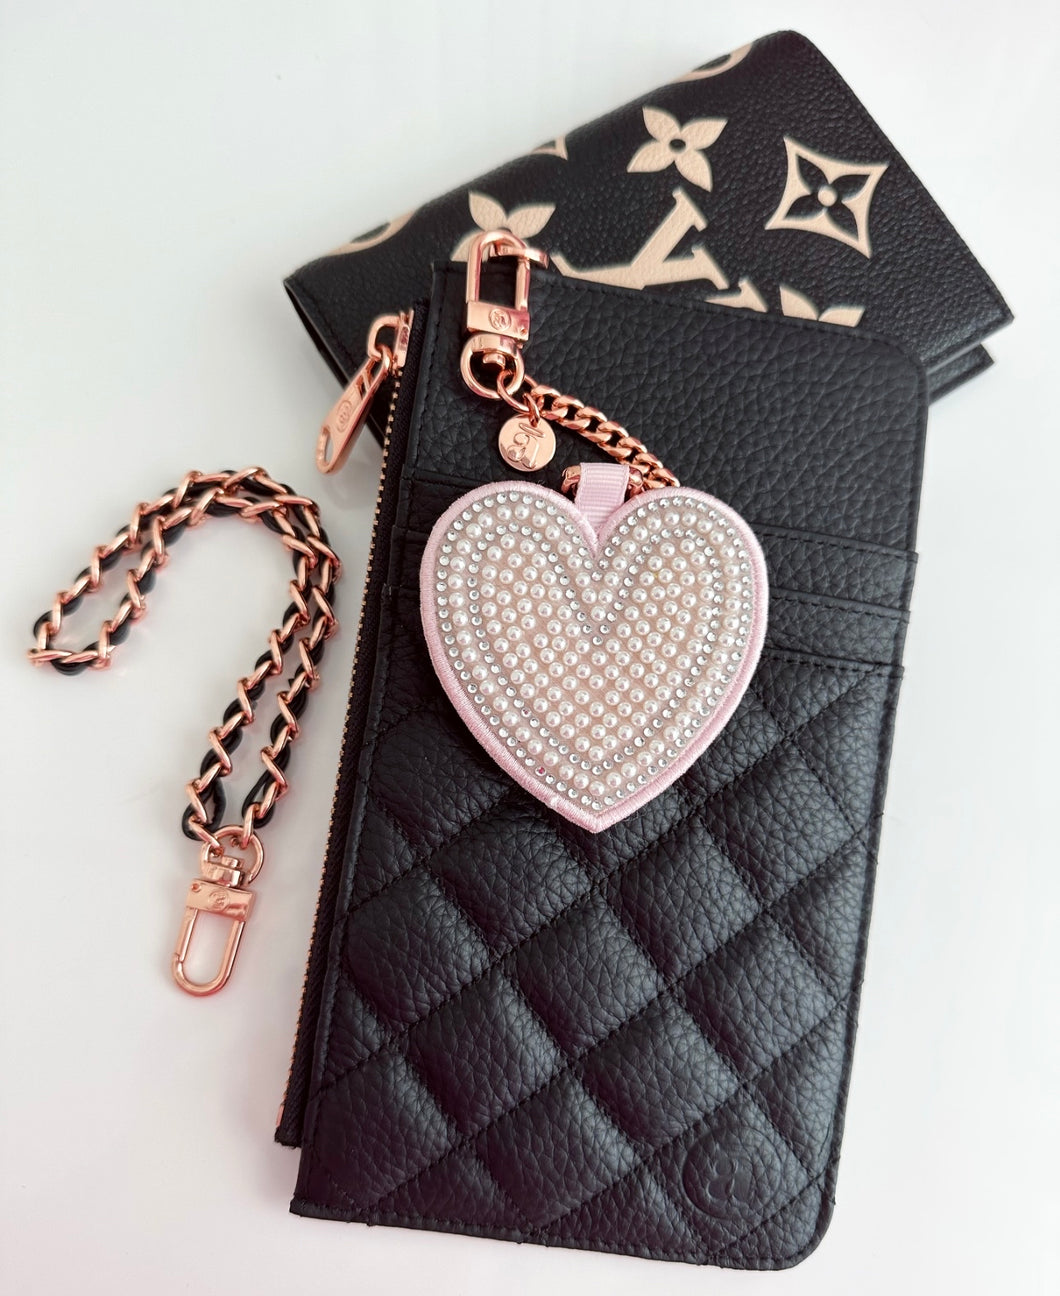 Lover designer heart keychains - pearls and crystals * Limited Edition *